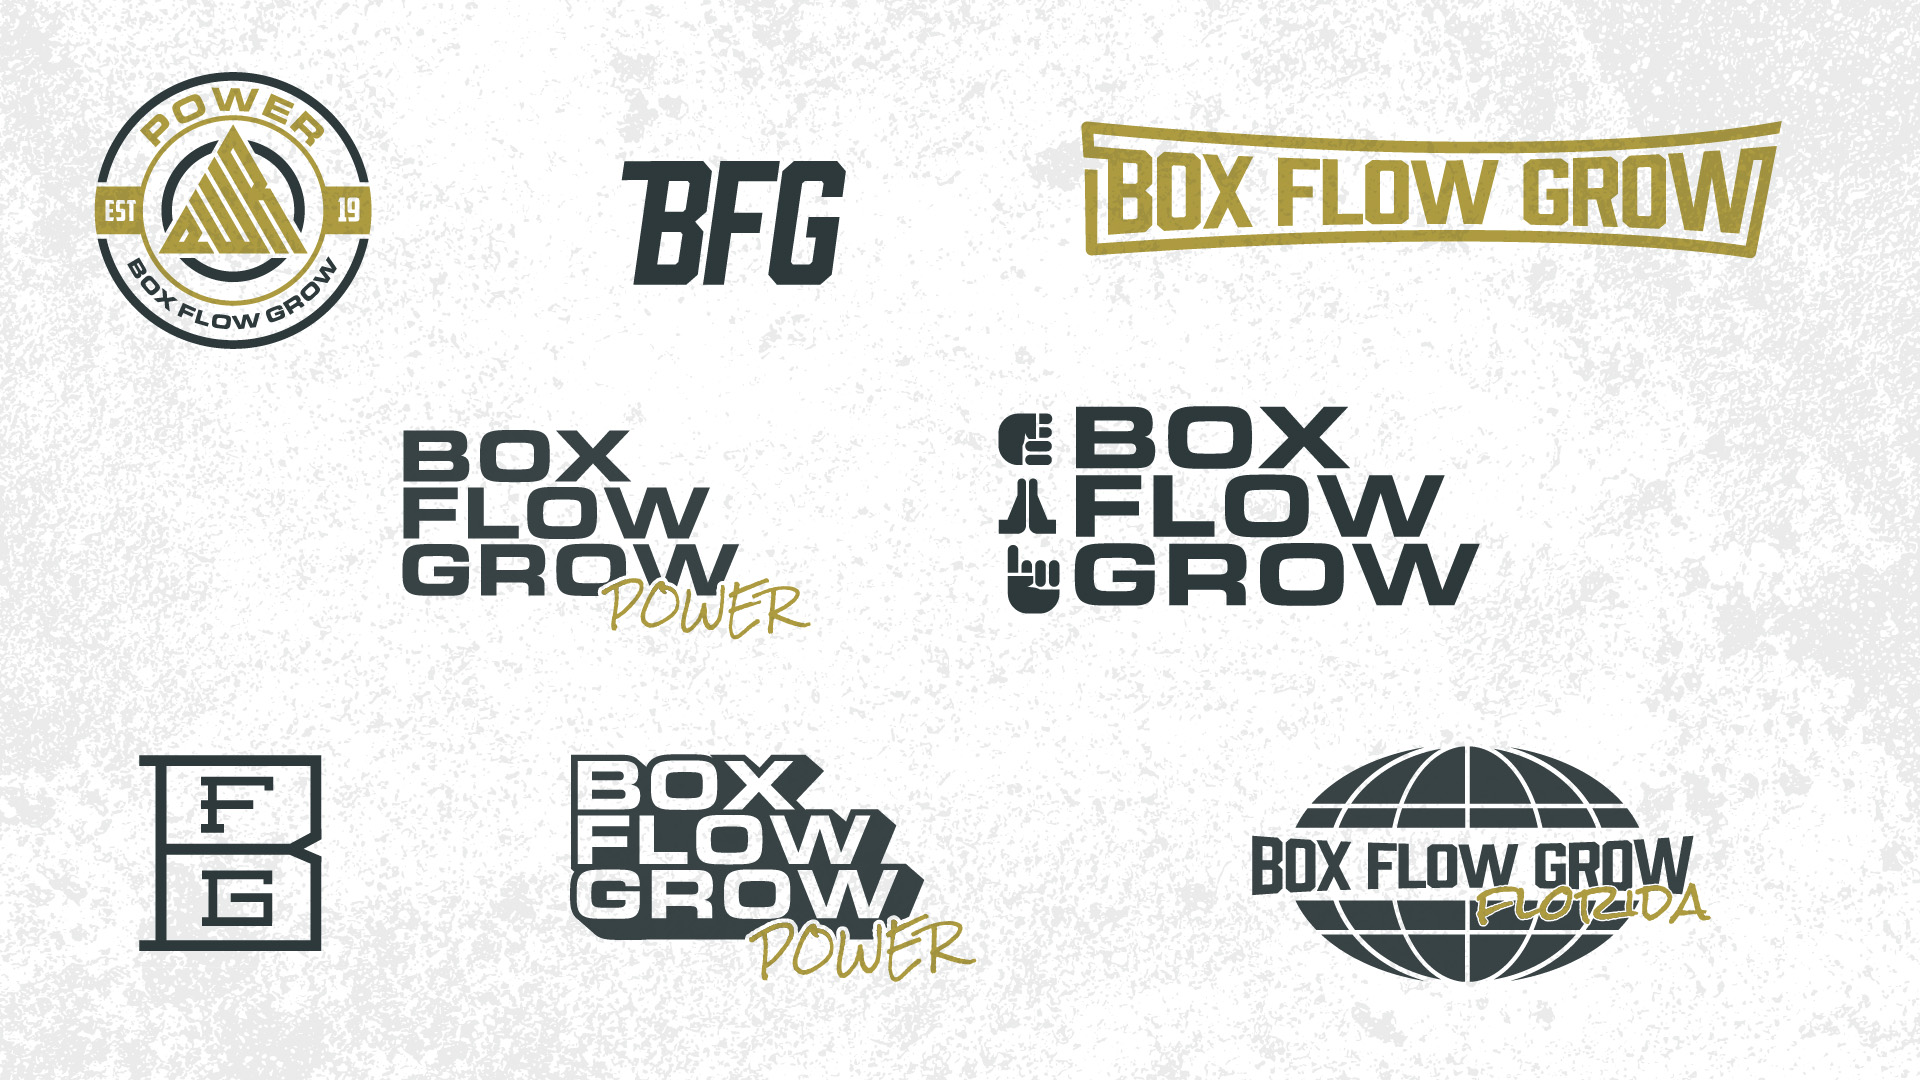 featured image two:Box Flow Grow Brand System